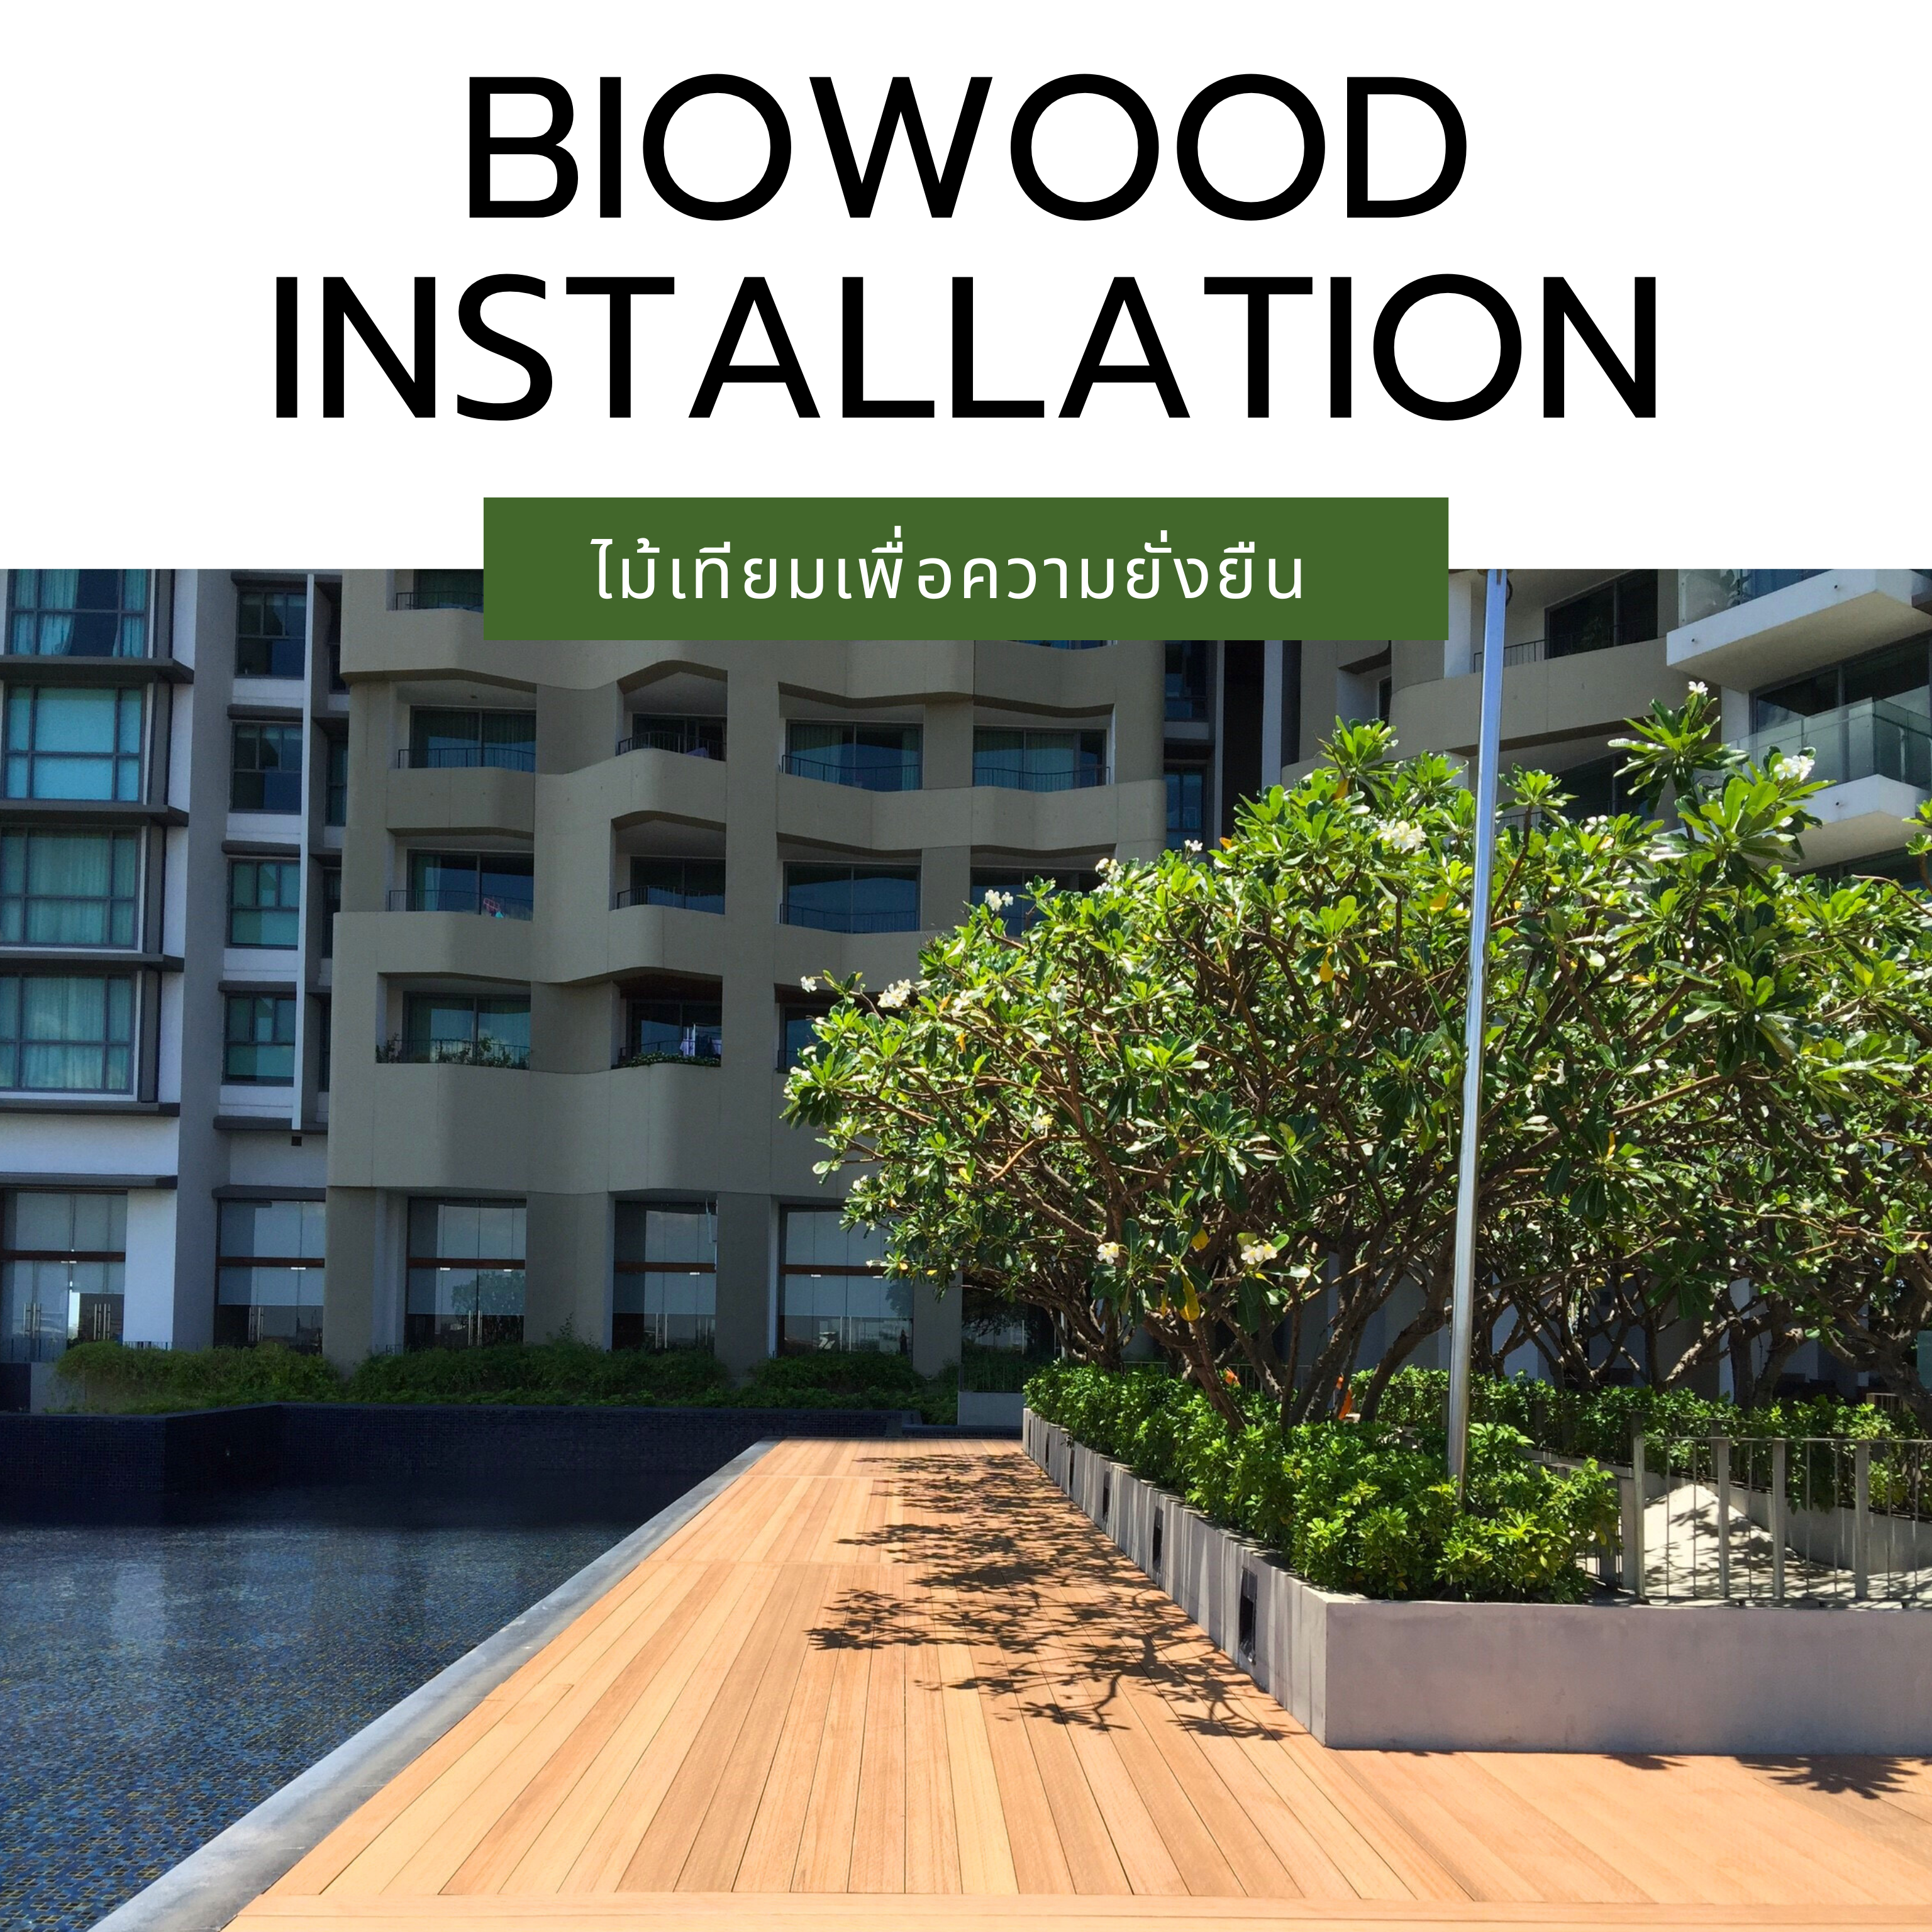 Biowood Installation Cover